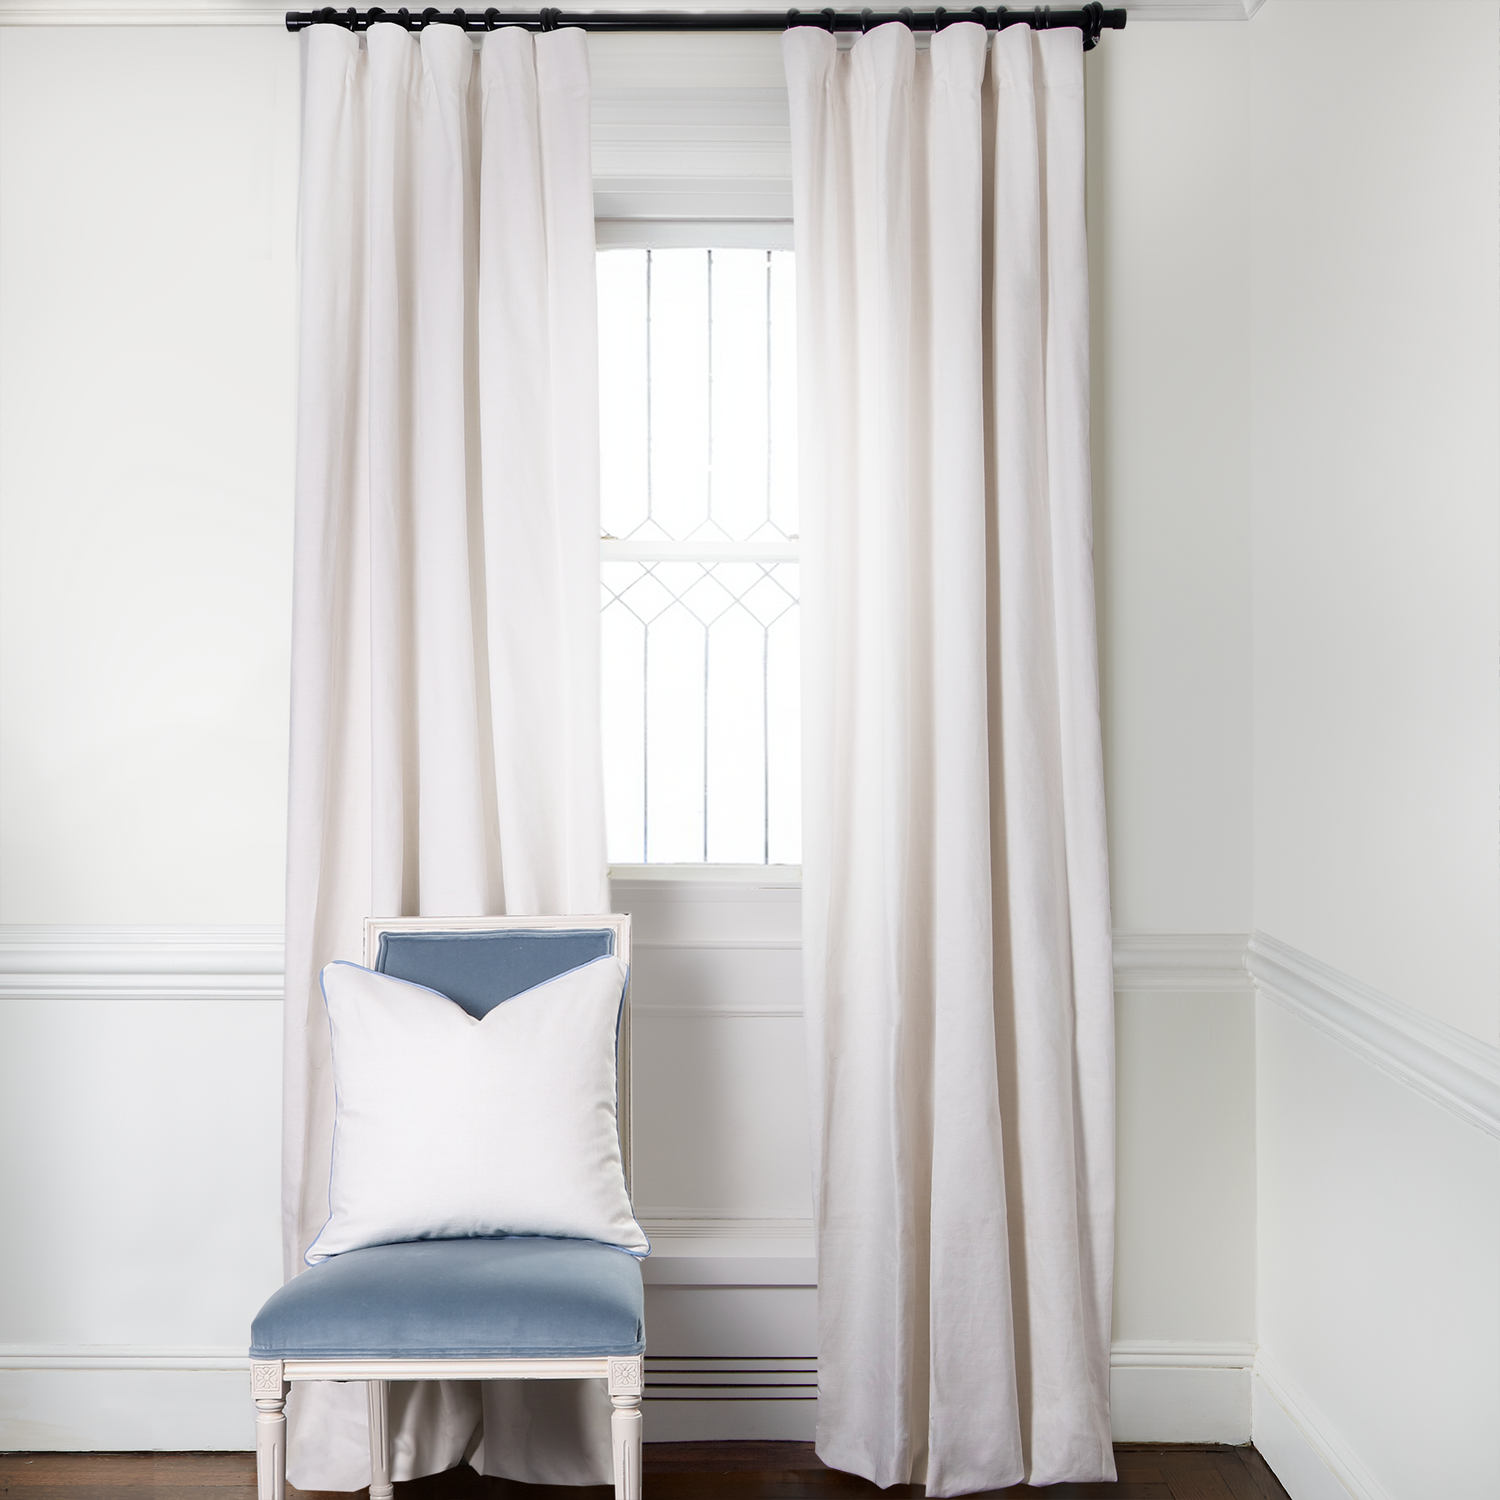 Natural White Linen Curtains on metal rod in front of an illuminated window with Baby Blue Velvet chair with Natural White Pillow on it